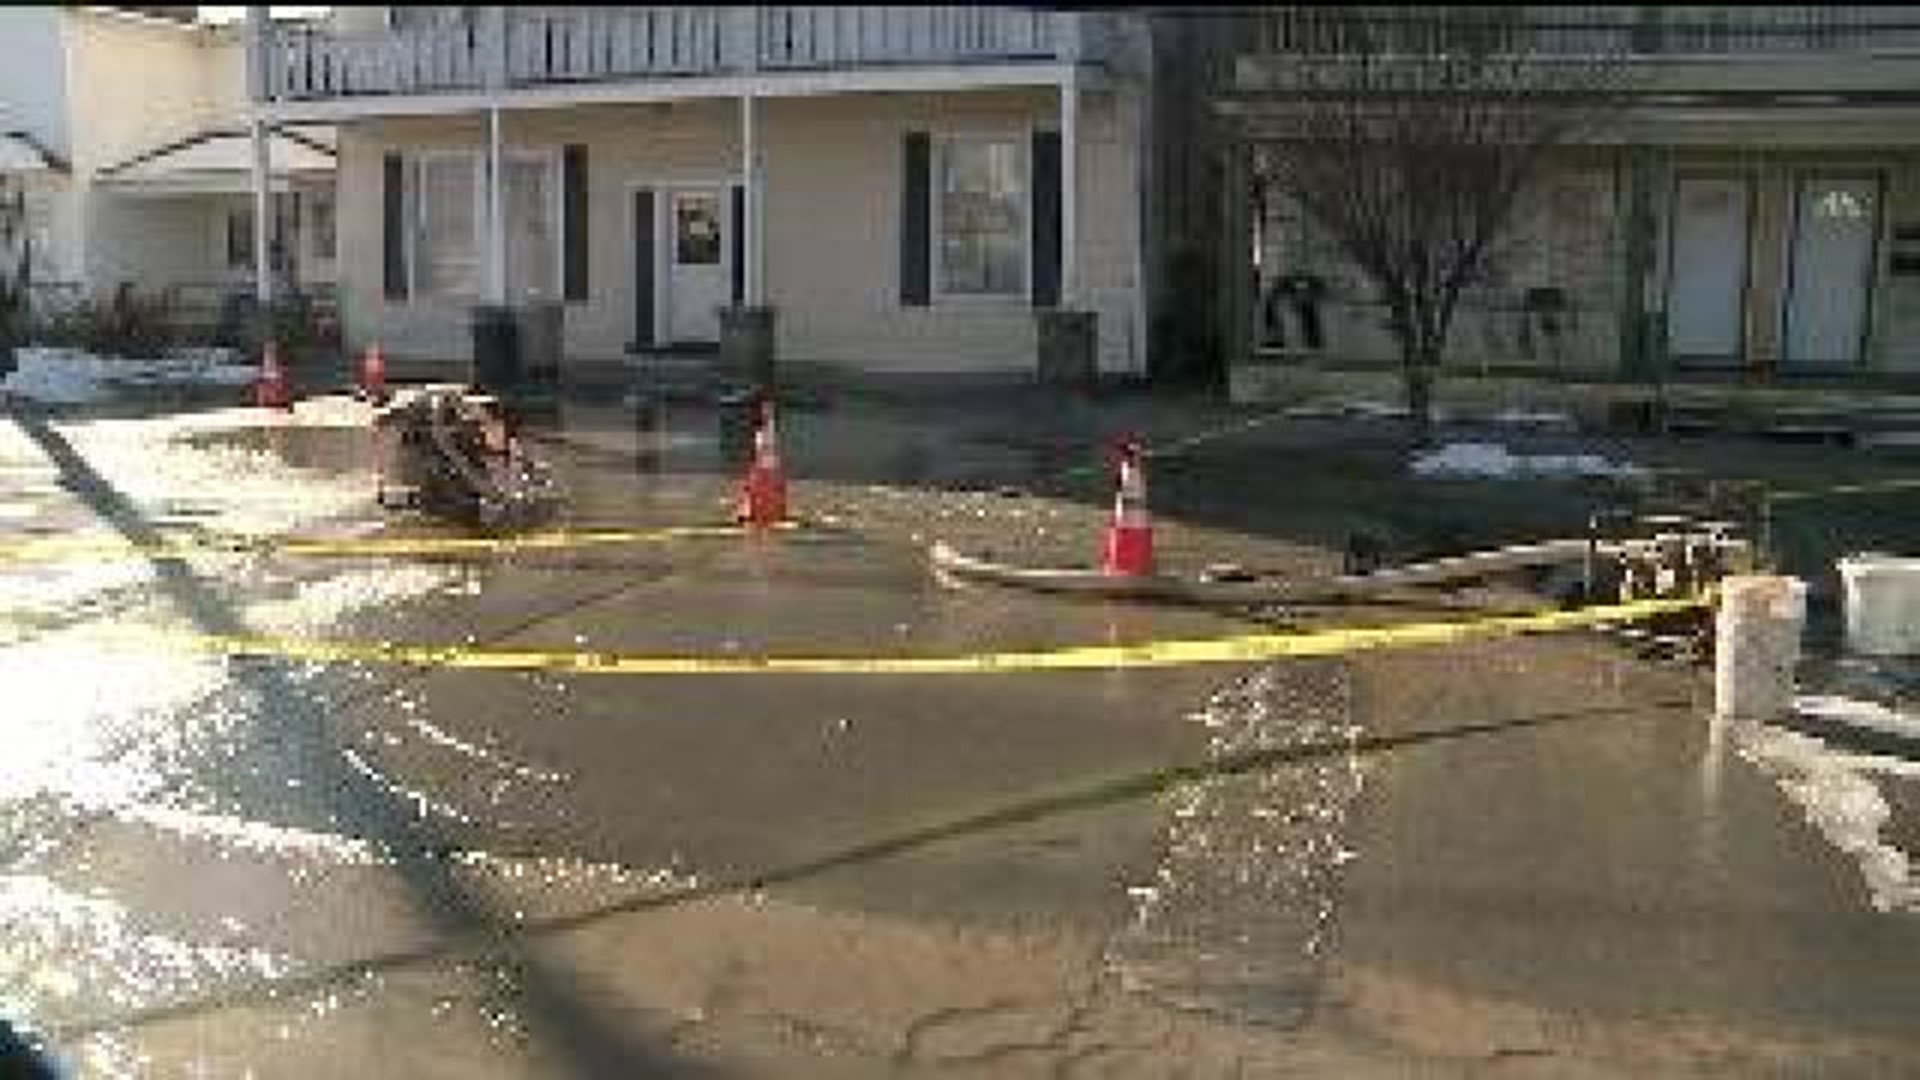 Water Main Break Could Disrupt Service to Thousands of Customers